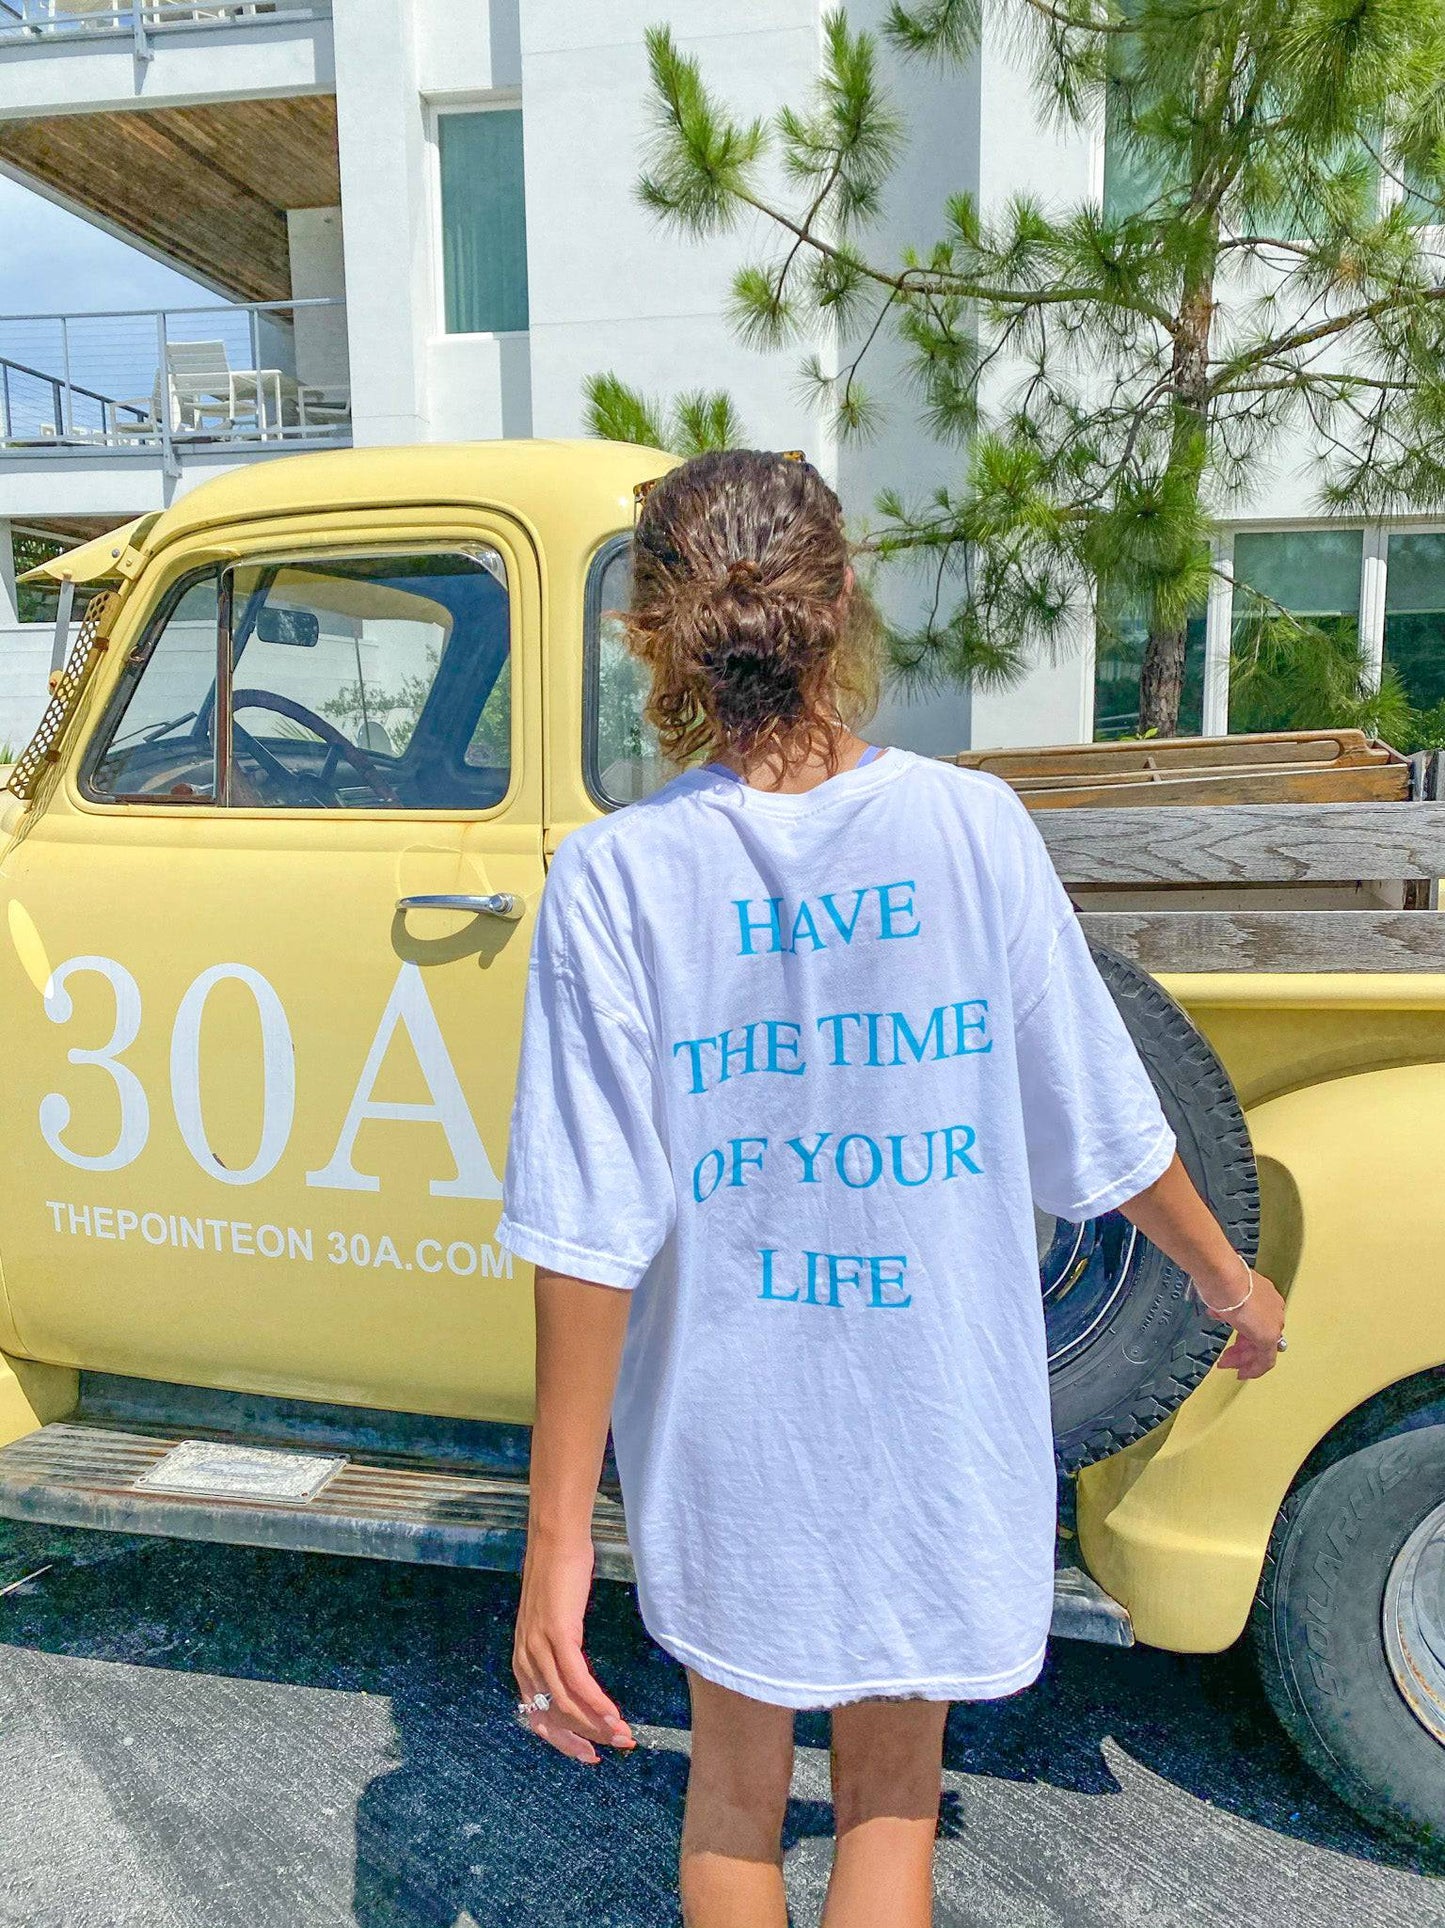 HAVE THE TIME OF YOUR LIFE SHIRT - JEWELS KENNEDY DESIGNS